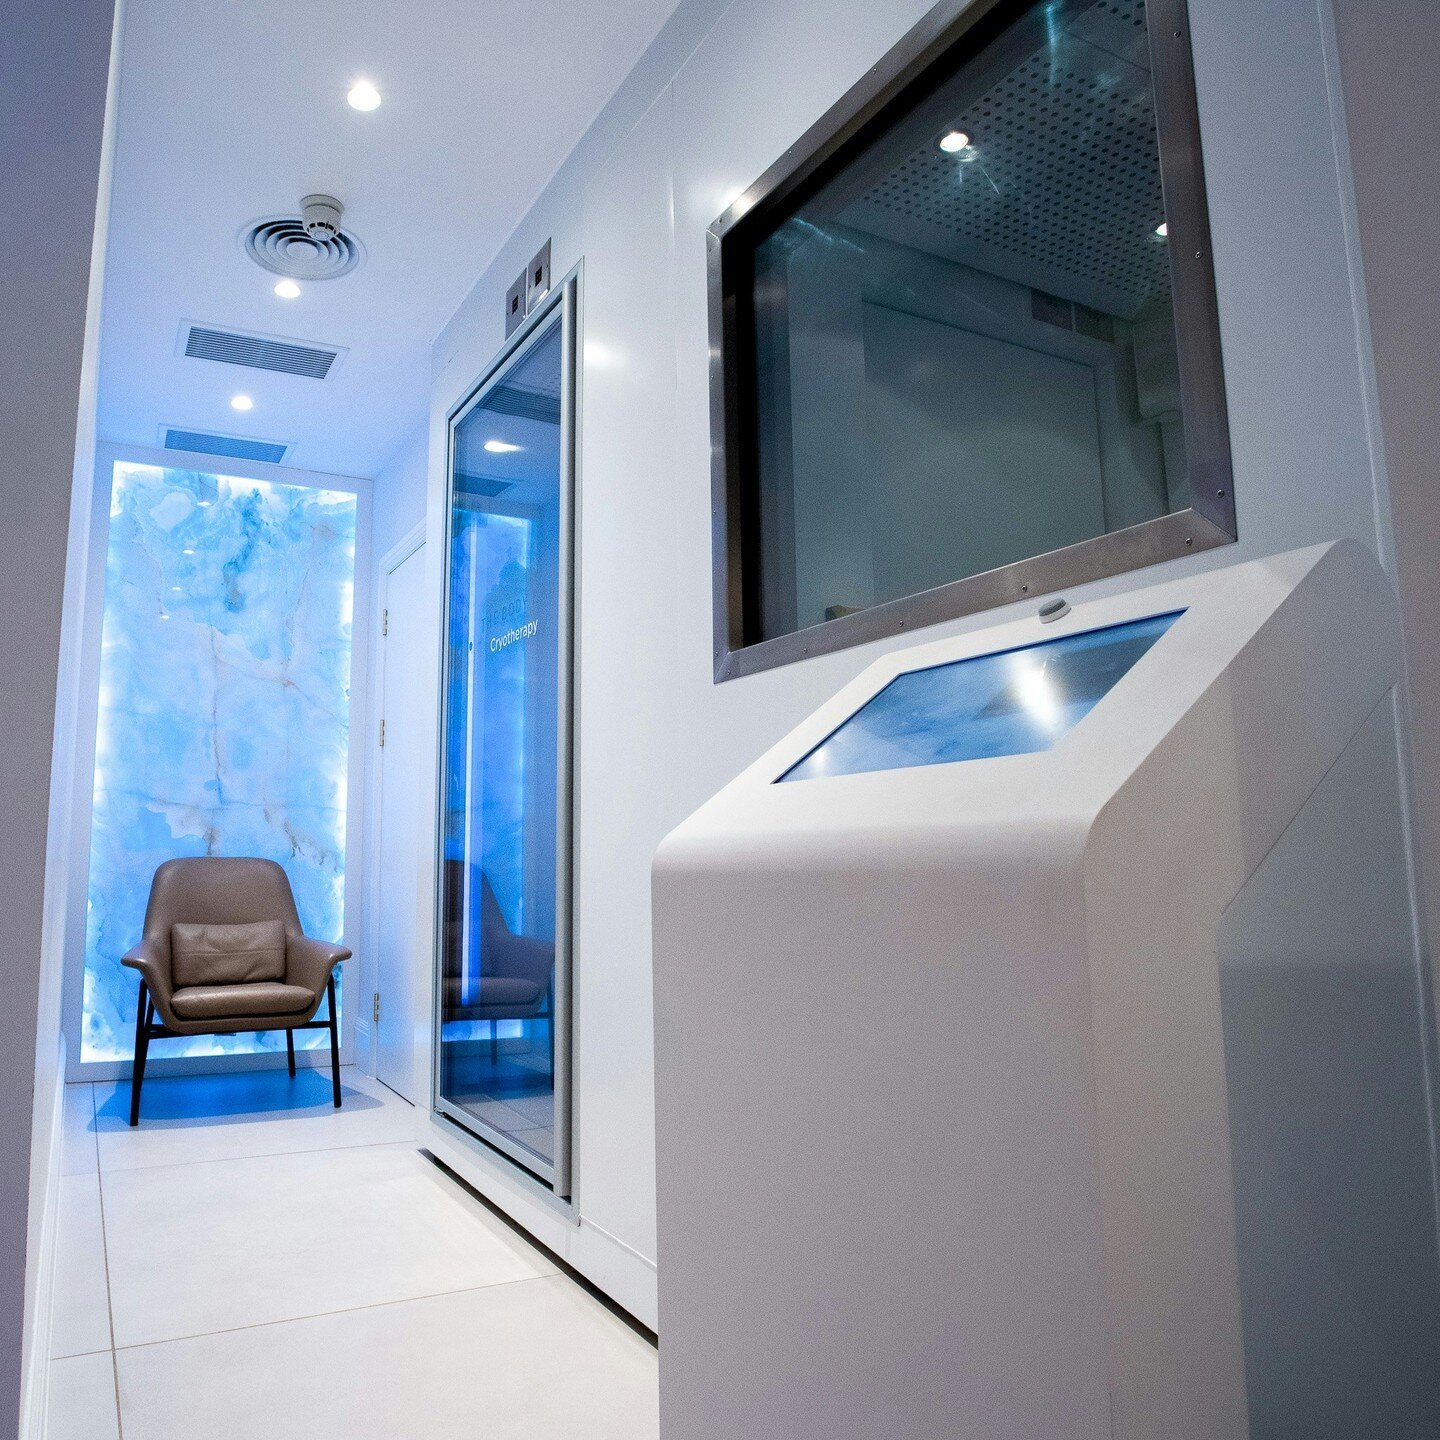 Whole-body Cryotherapy | The Body Lab

With technological advances, cold immersion has come a long way since its recorded use in 3500 BC. With the rise of cold plunges and showers, those focusing on their wellness are being introduced to a revolution